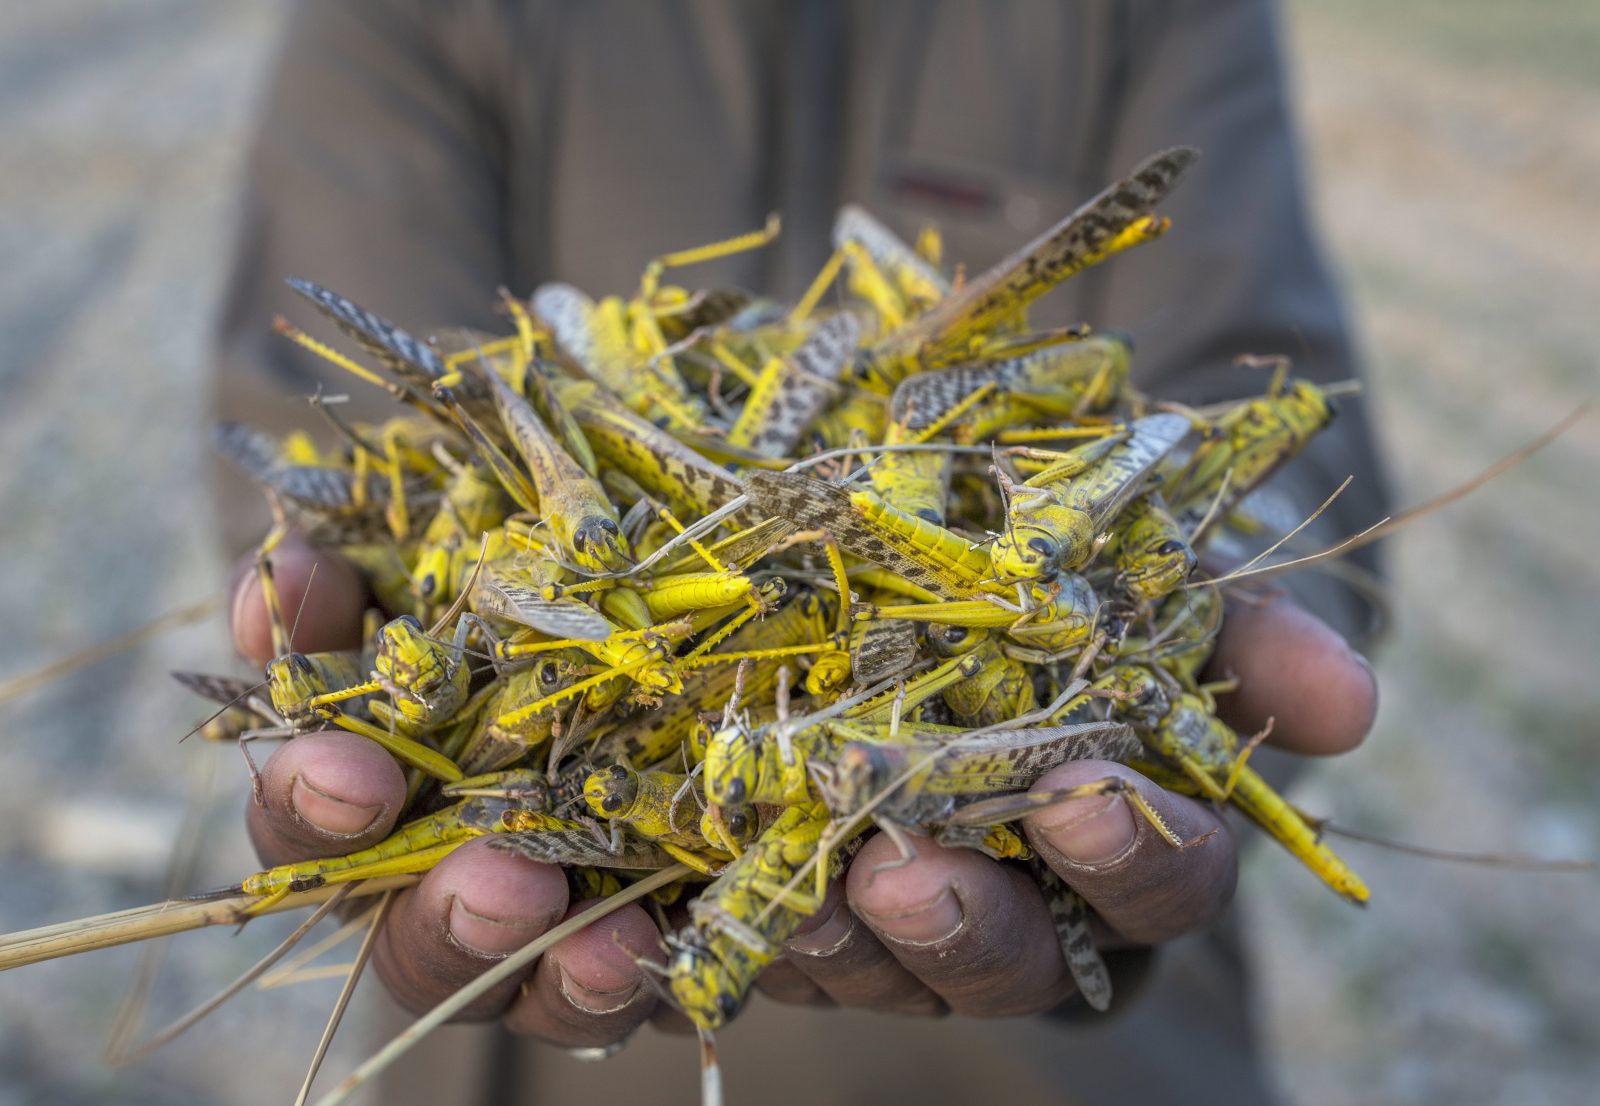 A Group Of Locusts